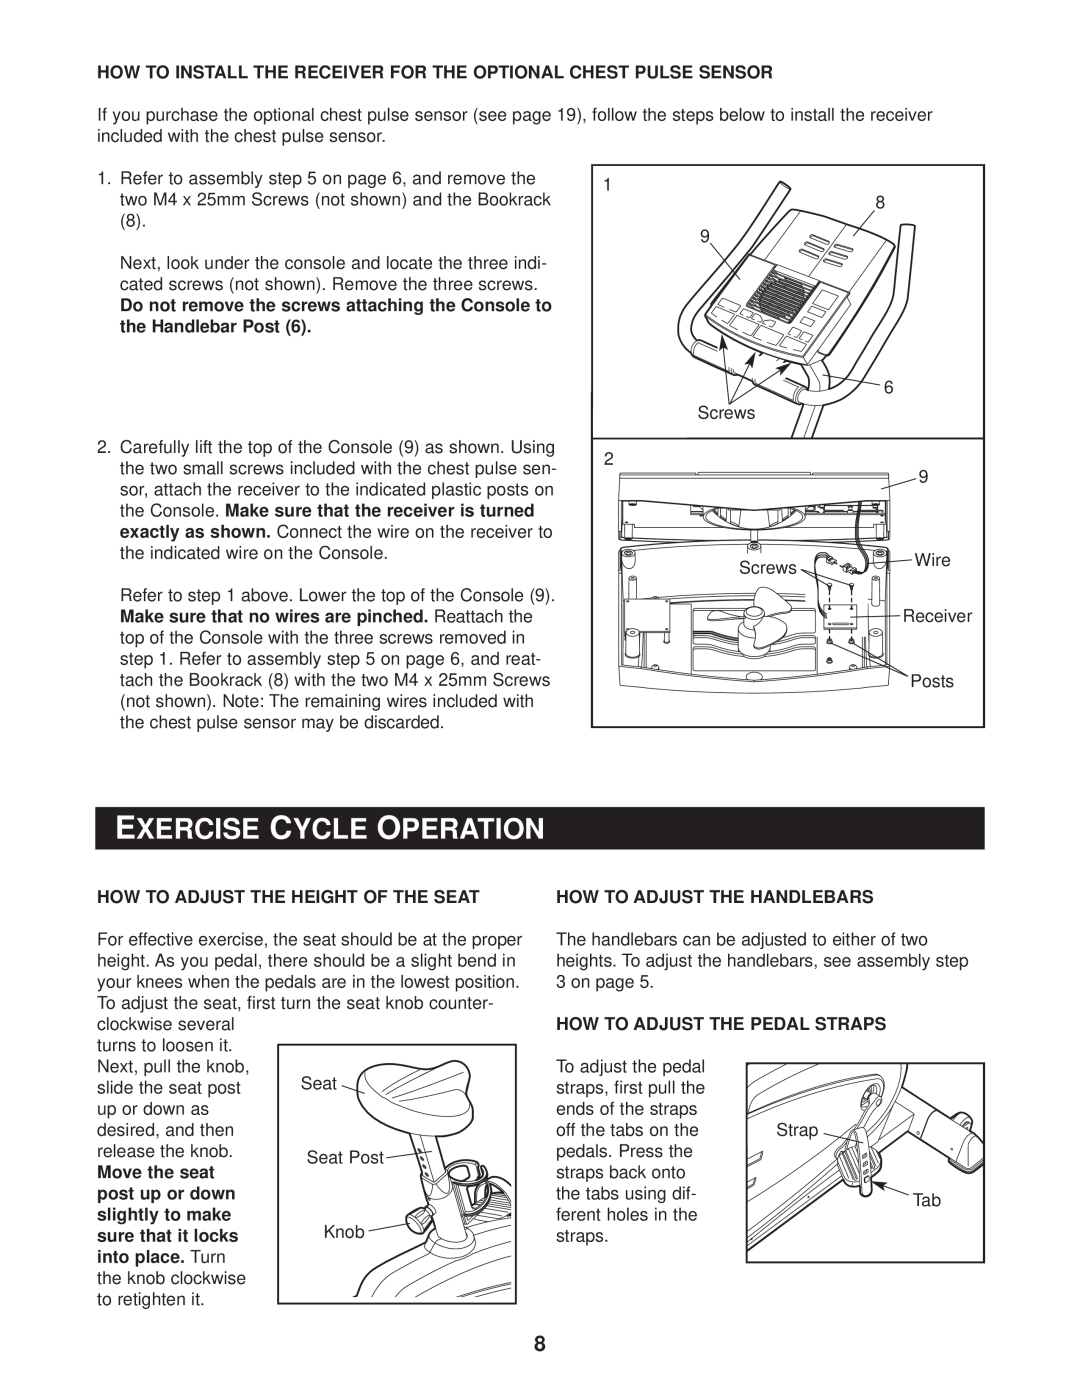 Reebok Fitness RBEX49020 manual Exercise Cycle Operation 